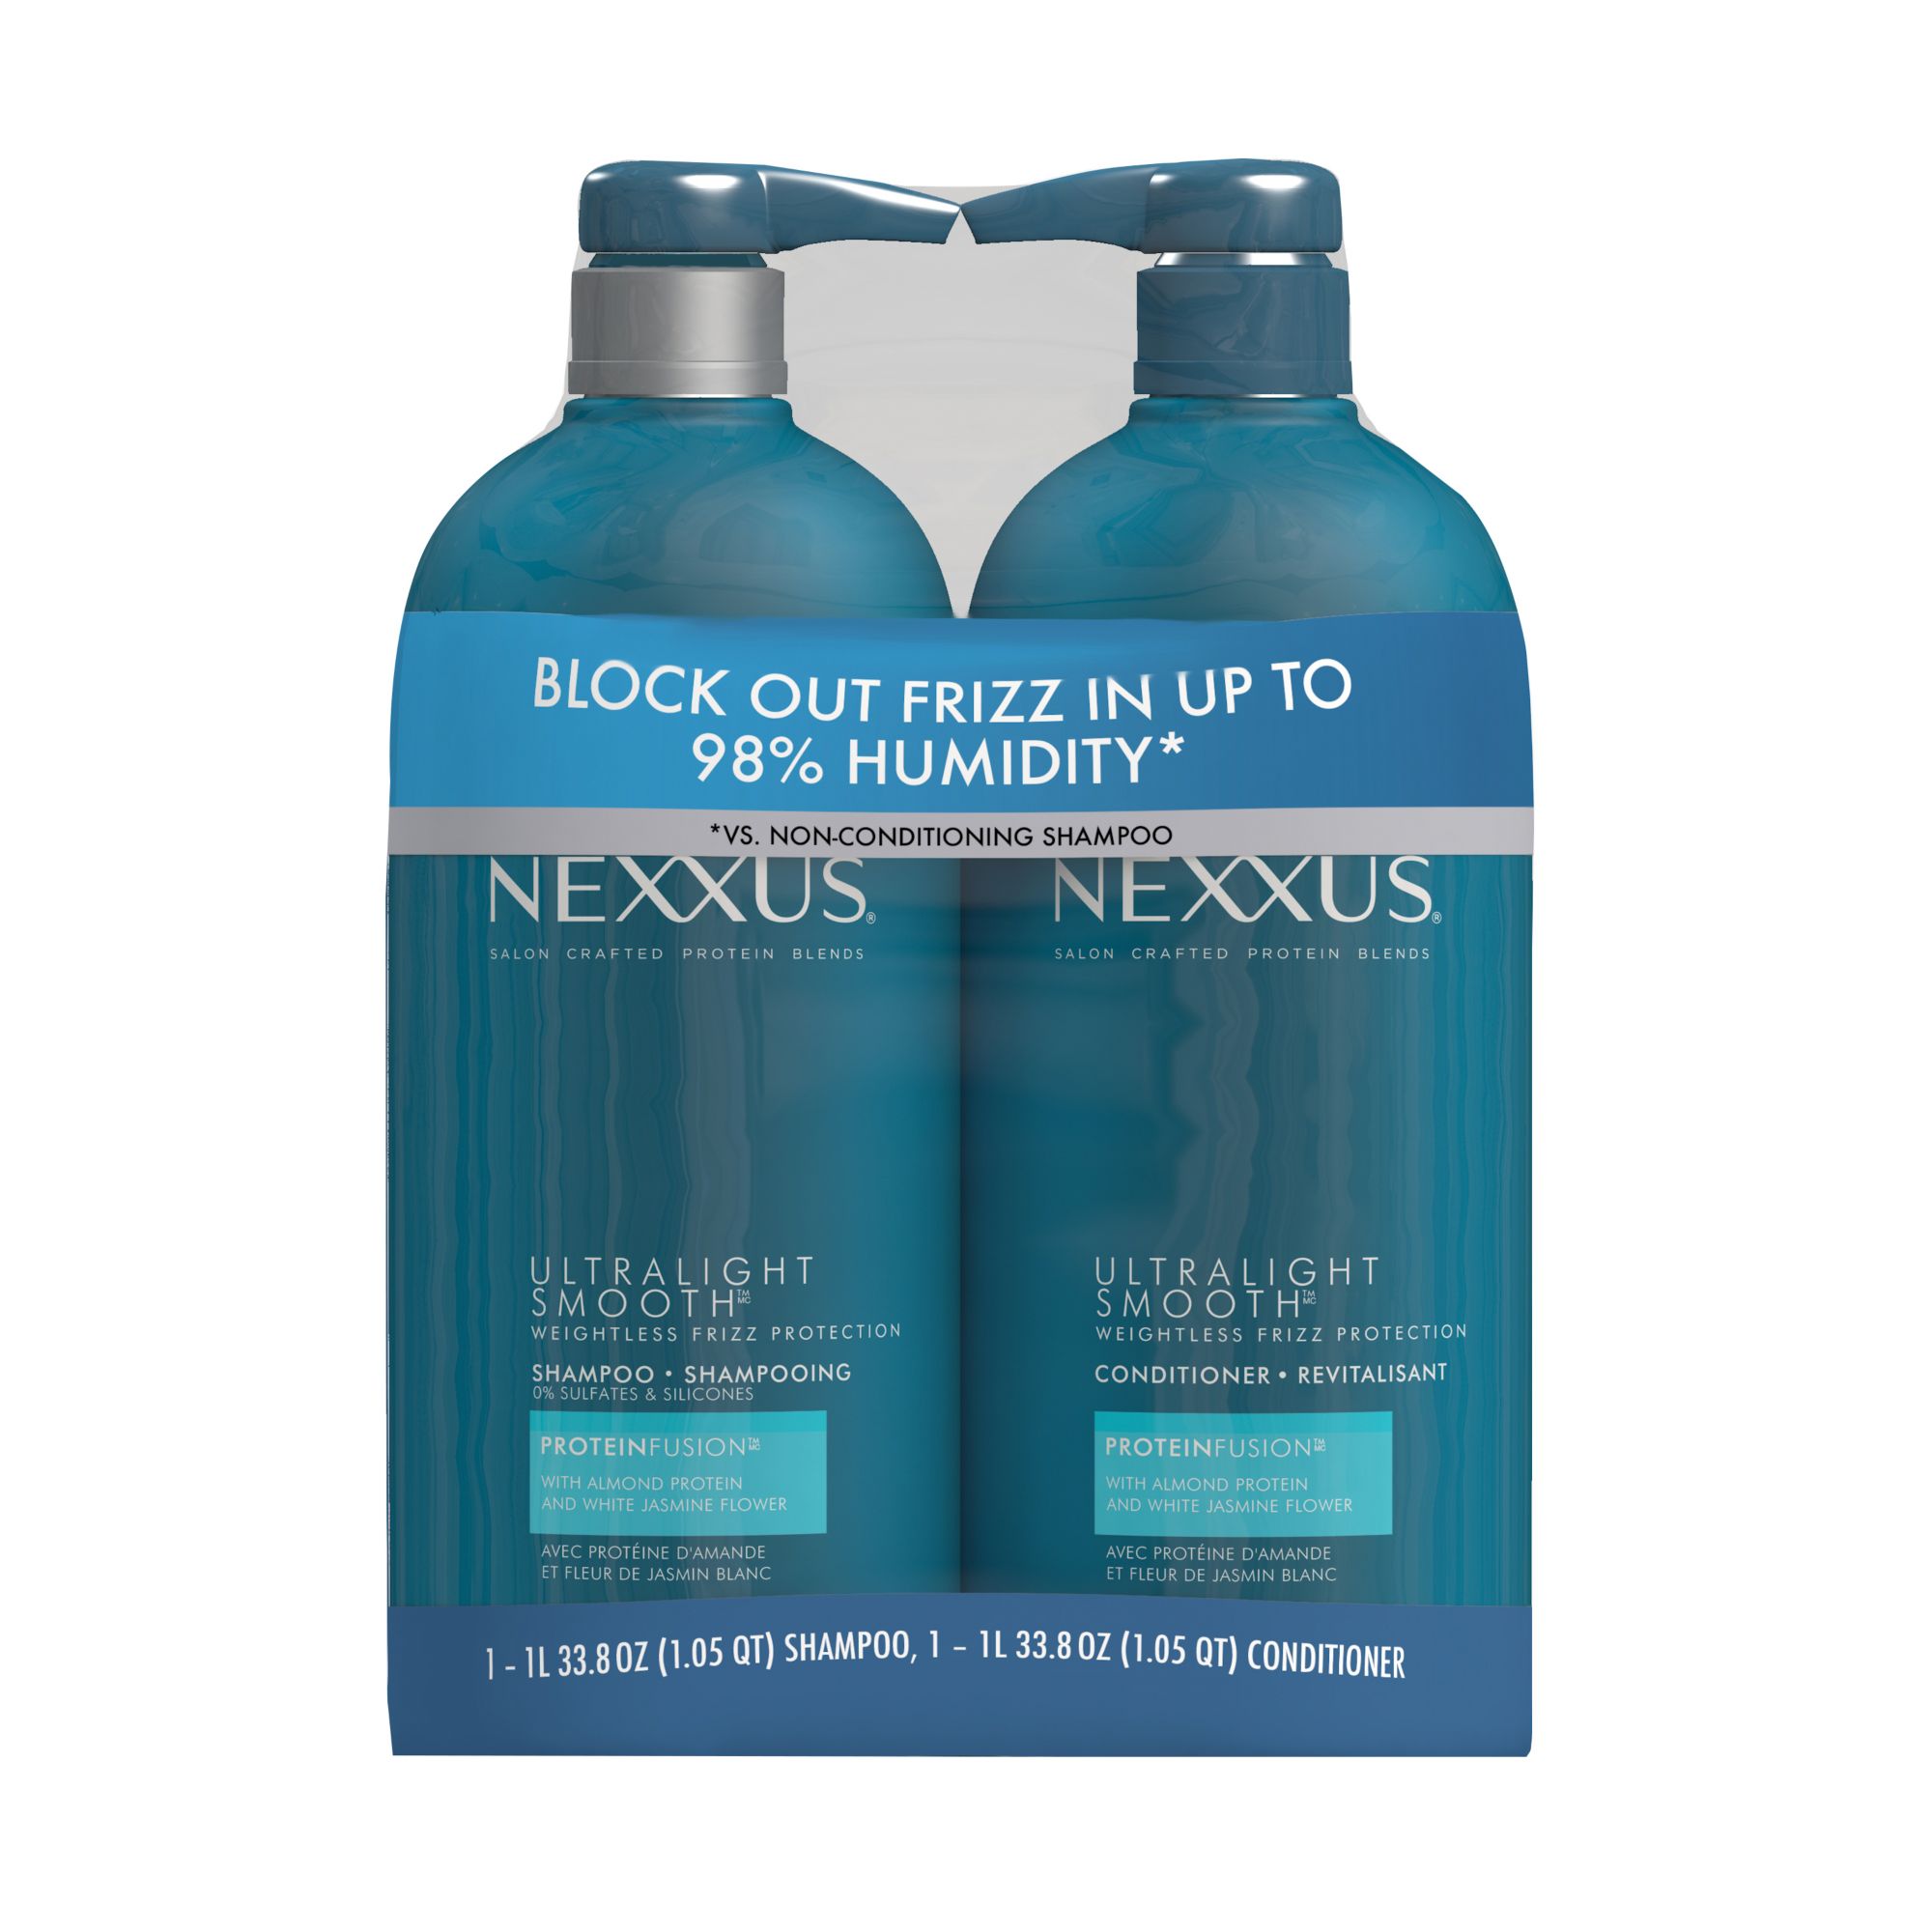 Nexxus Ultralight Smooth Shampoo & Conditioner System for Dry & Frizzy Hair, 2 pk./33.8 oz.